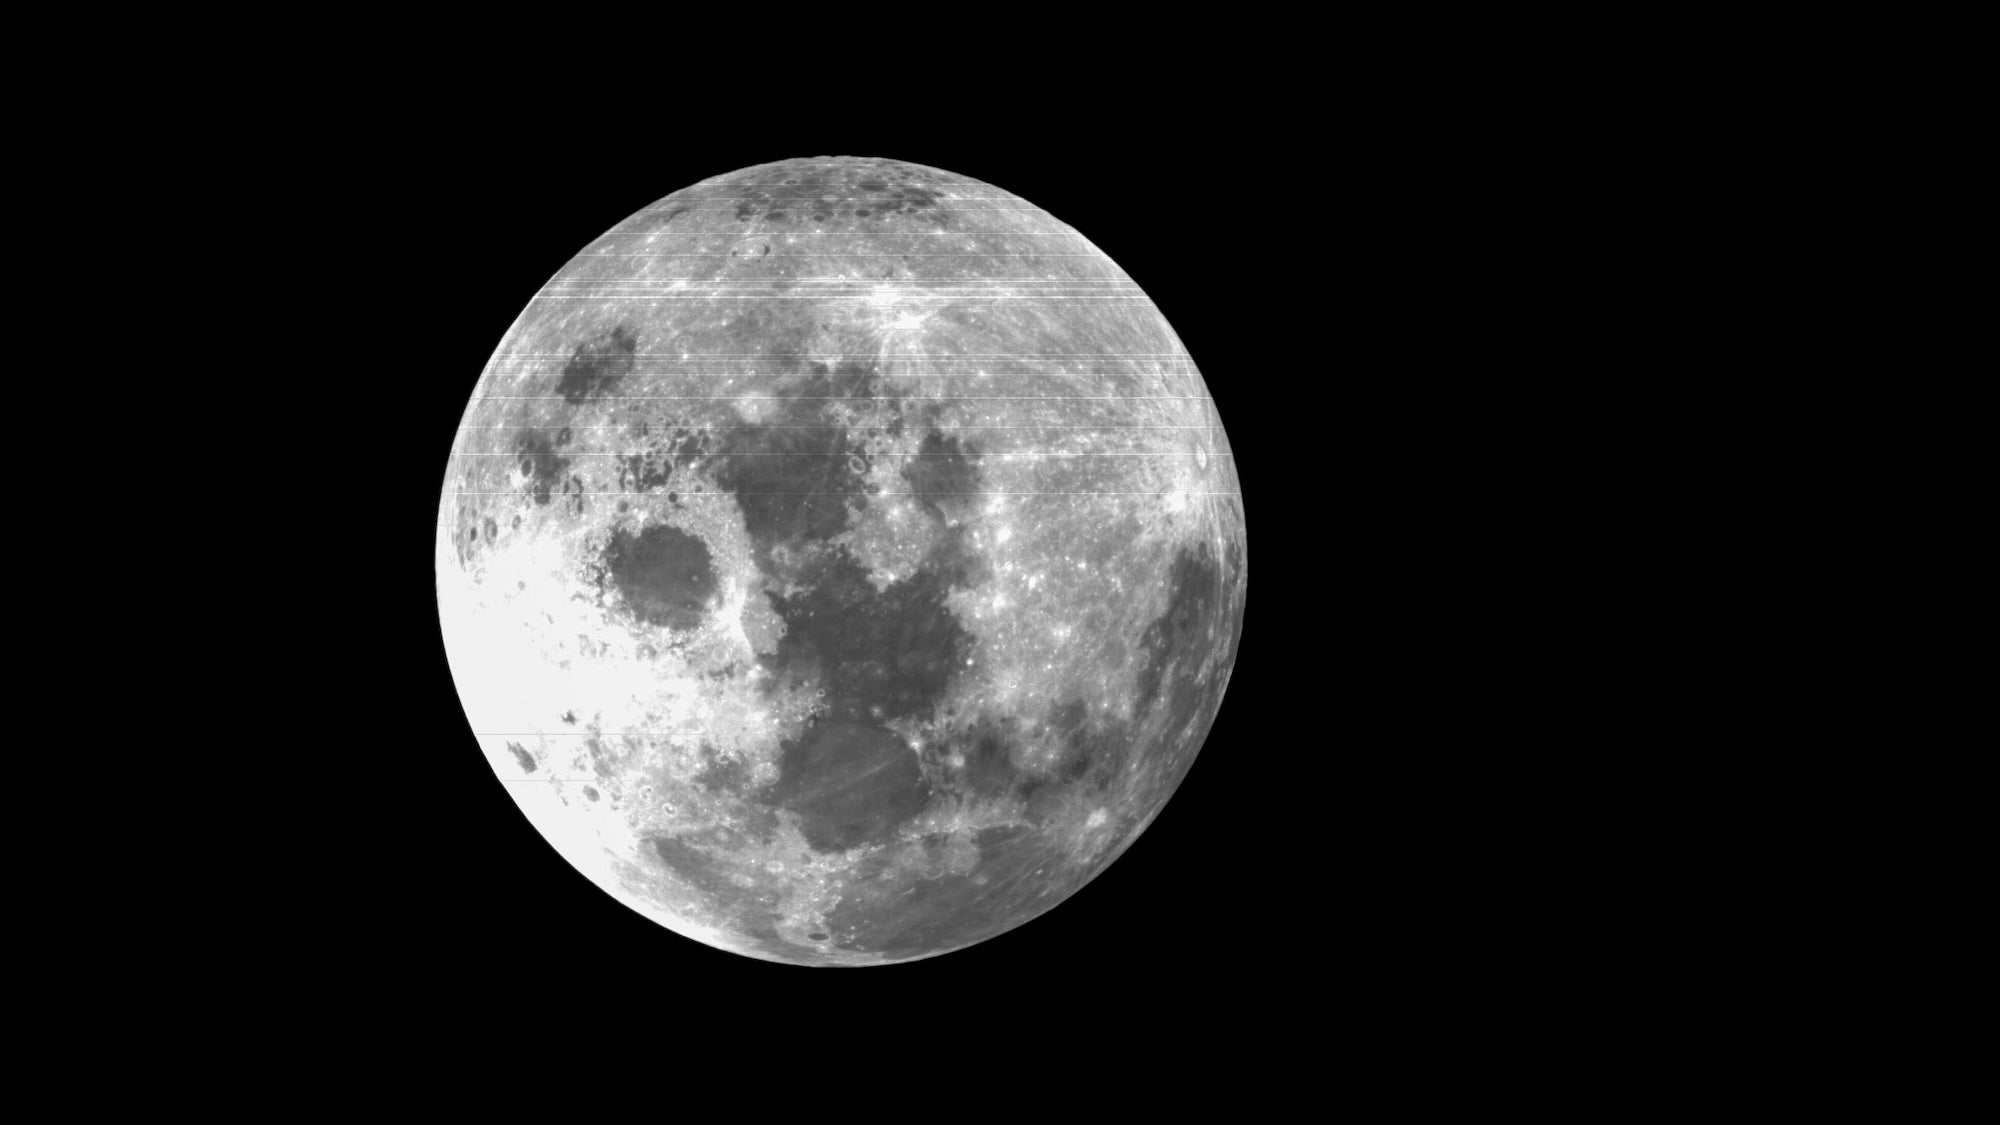 Moon photograph from Artemis 1